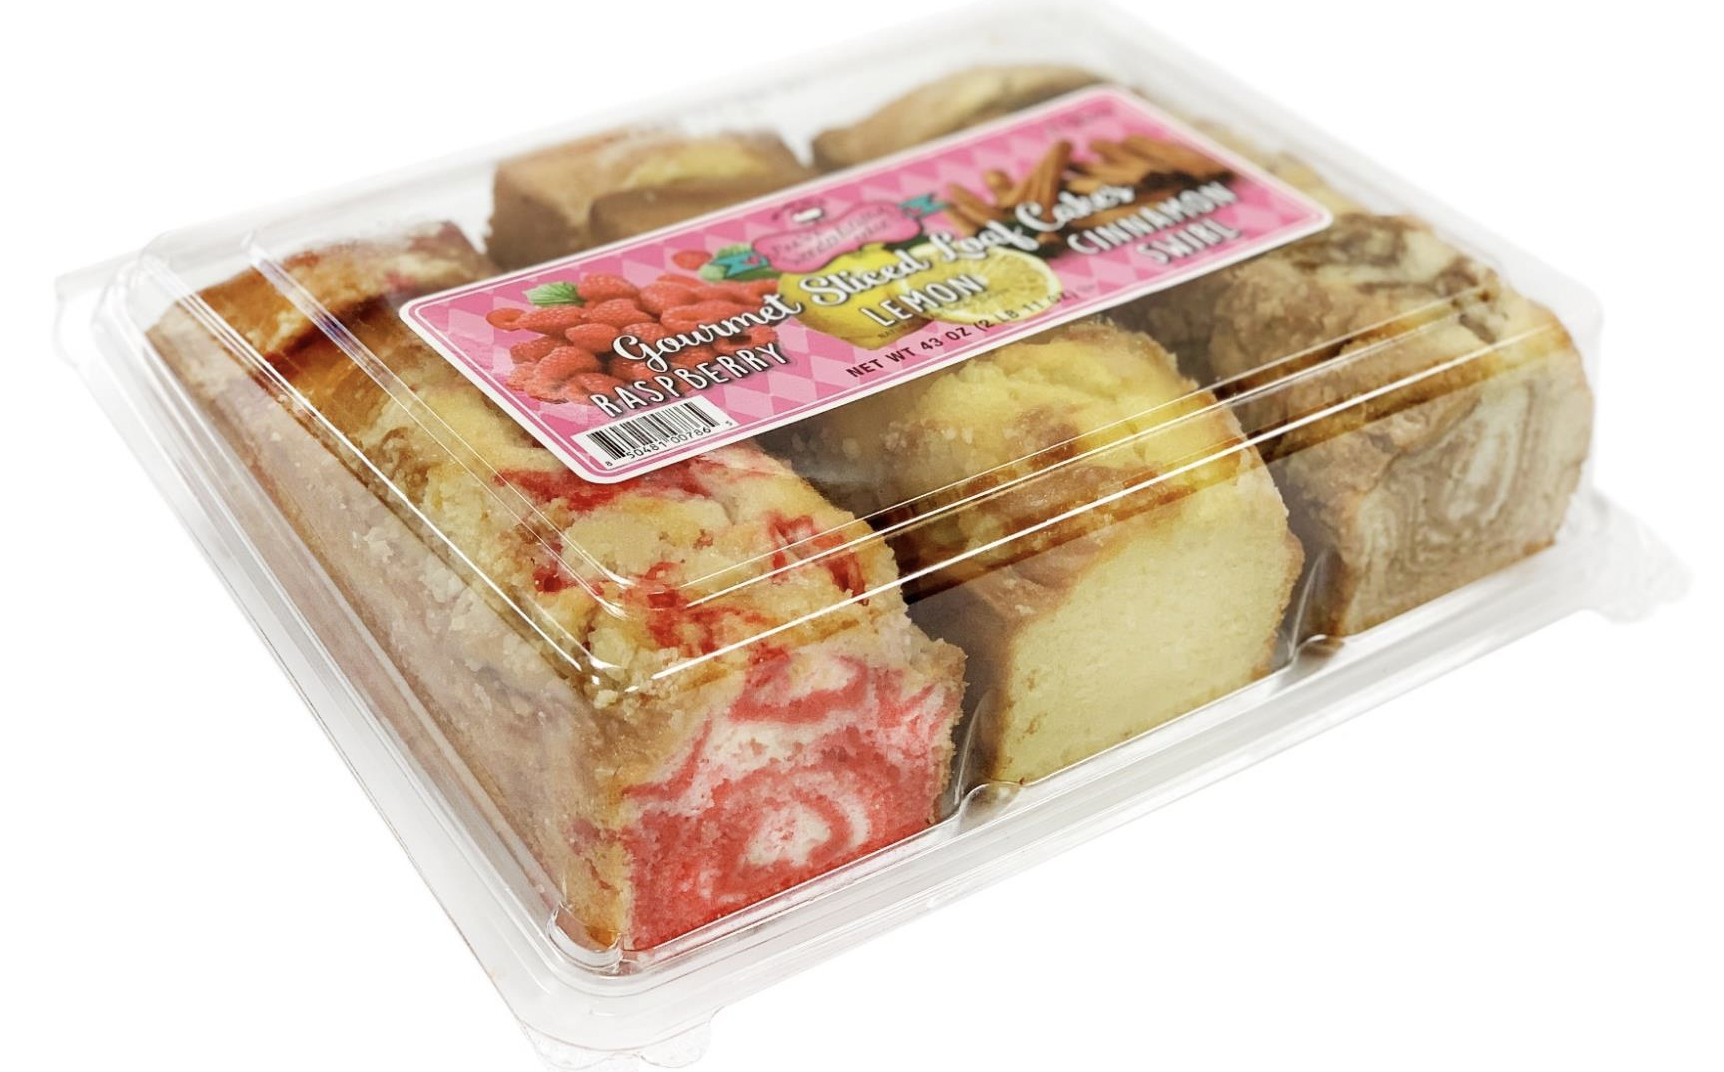 Loaf cake slices in clear container with label